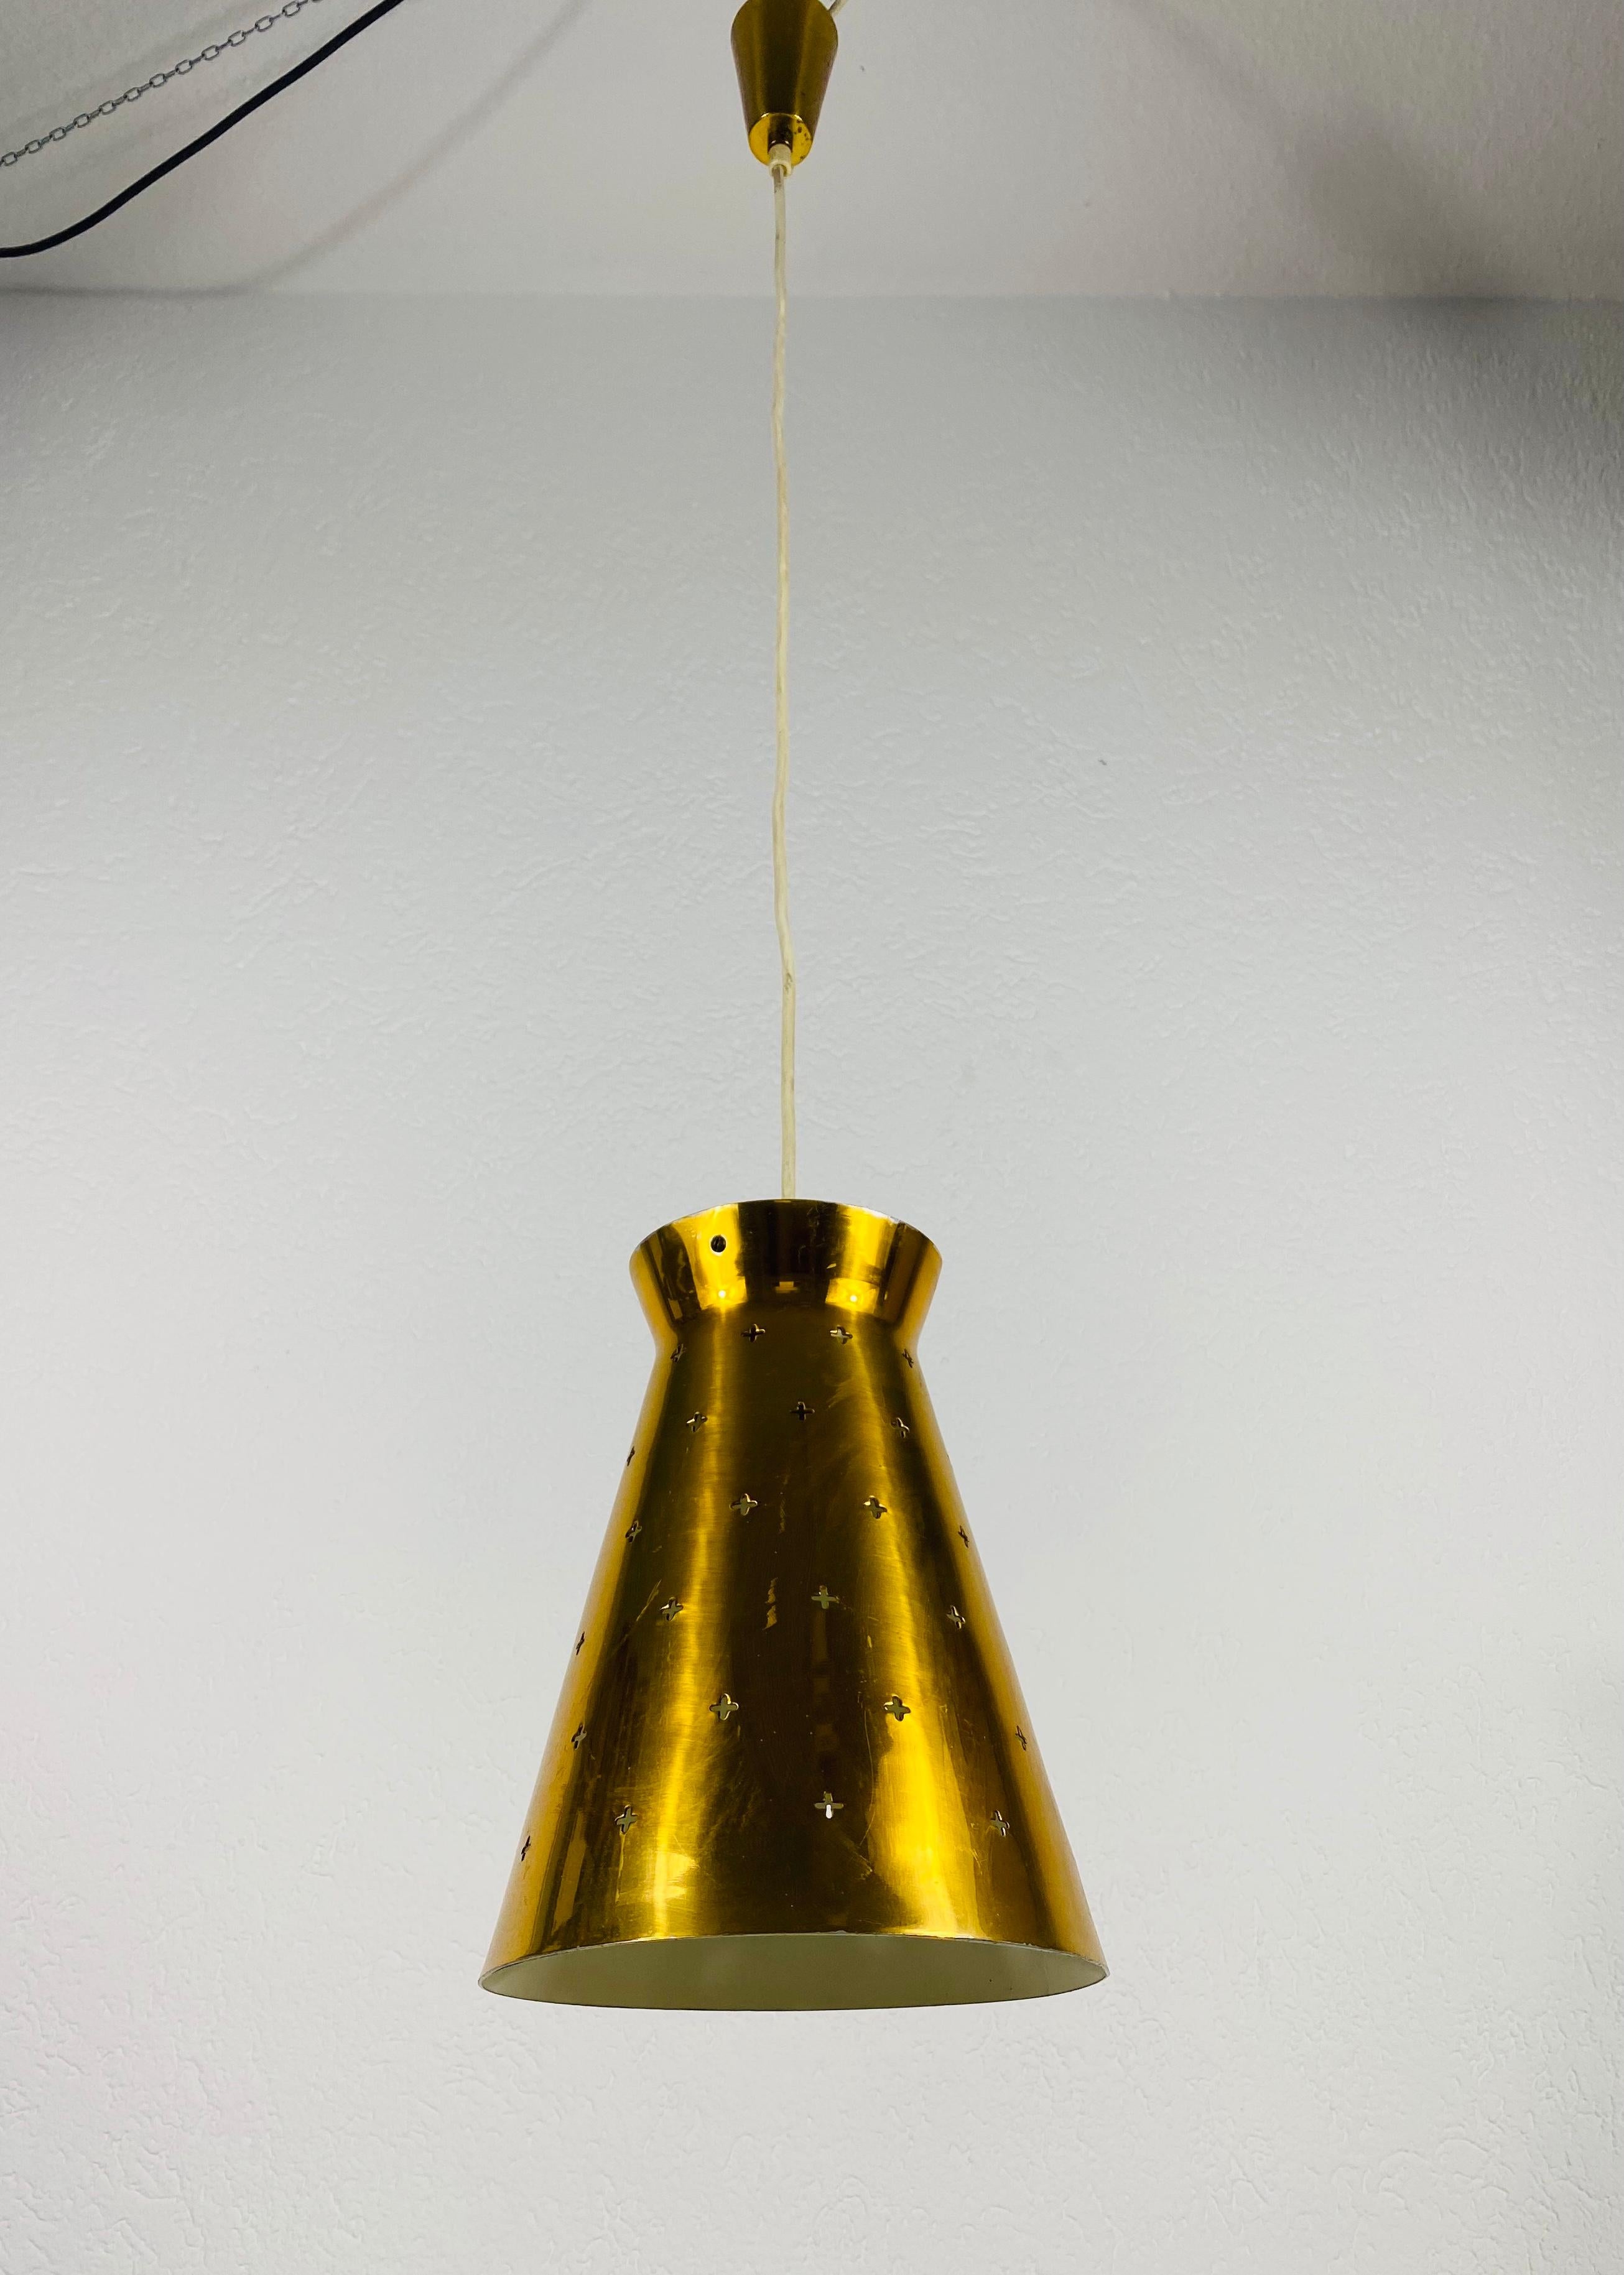 Polished Brass Pendant Lamp in the Style of Paavo Tynell, 1950s For Sale 2